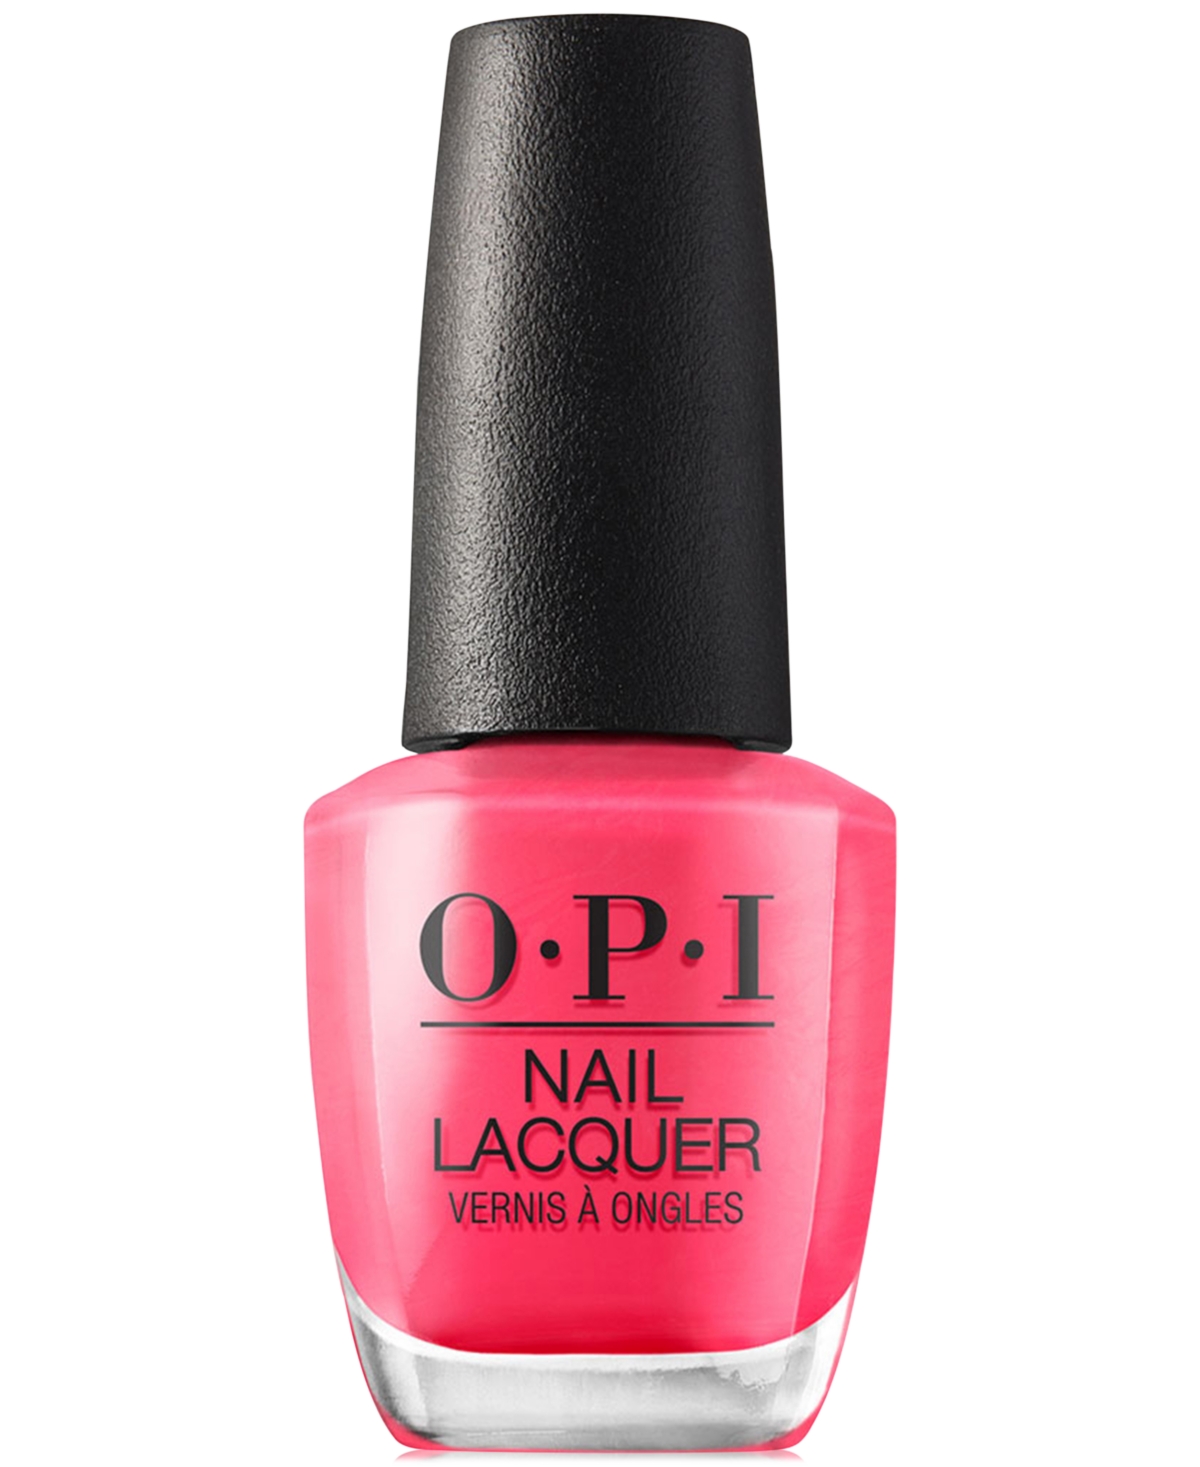 Opi Nail Lacquer In Strawberry Margarita